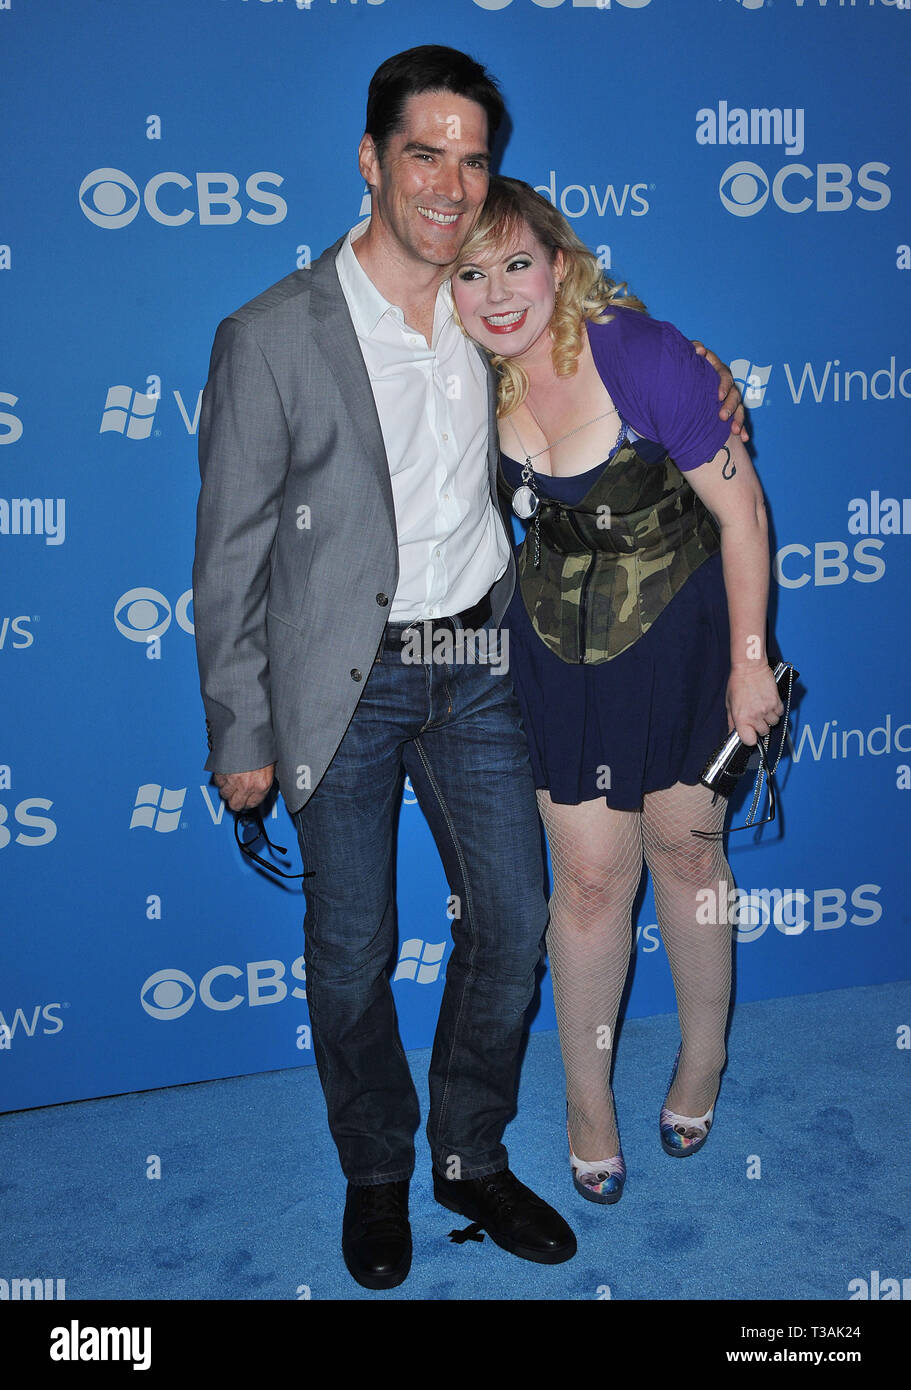 Thomas Gibson and Kirsten Vangsness at the CBS 2012 Fall Premiere Party at the Greystone Manor In Los Angeles.Thomas Gibson and Kirsten Vangsness  Event in Hollywood Life - California, Red Carpet Event, USA, Film Industry, Celebrities, Photography, Bestof, Arts Culture and Entertainment, Topix Celebrities fashion, Best of, Hollywood Life, Event in Hollywood Life - California, Red Carpet and backstage, movie celebrities, TV celebrities, Music celebrities, Topix, actors from the same movie, cast and co star together.  inquiry tsuni@Gamma-USA.com, Credit Tsuni / USA, 2012 - Group, TV and movie ca Stock Photo